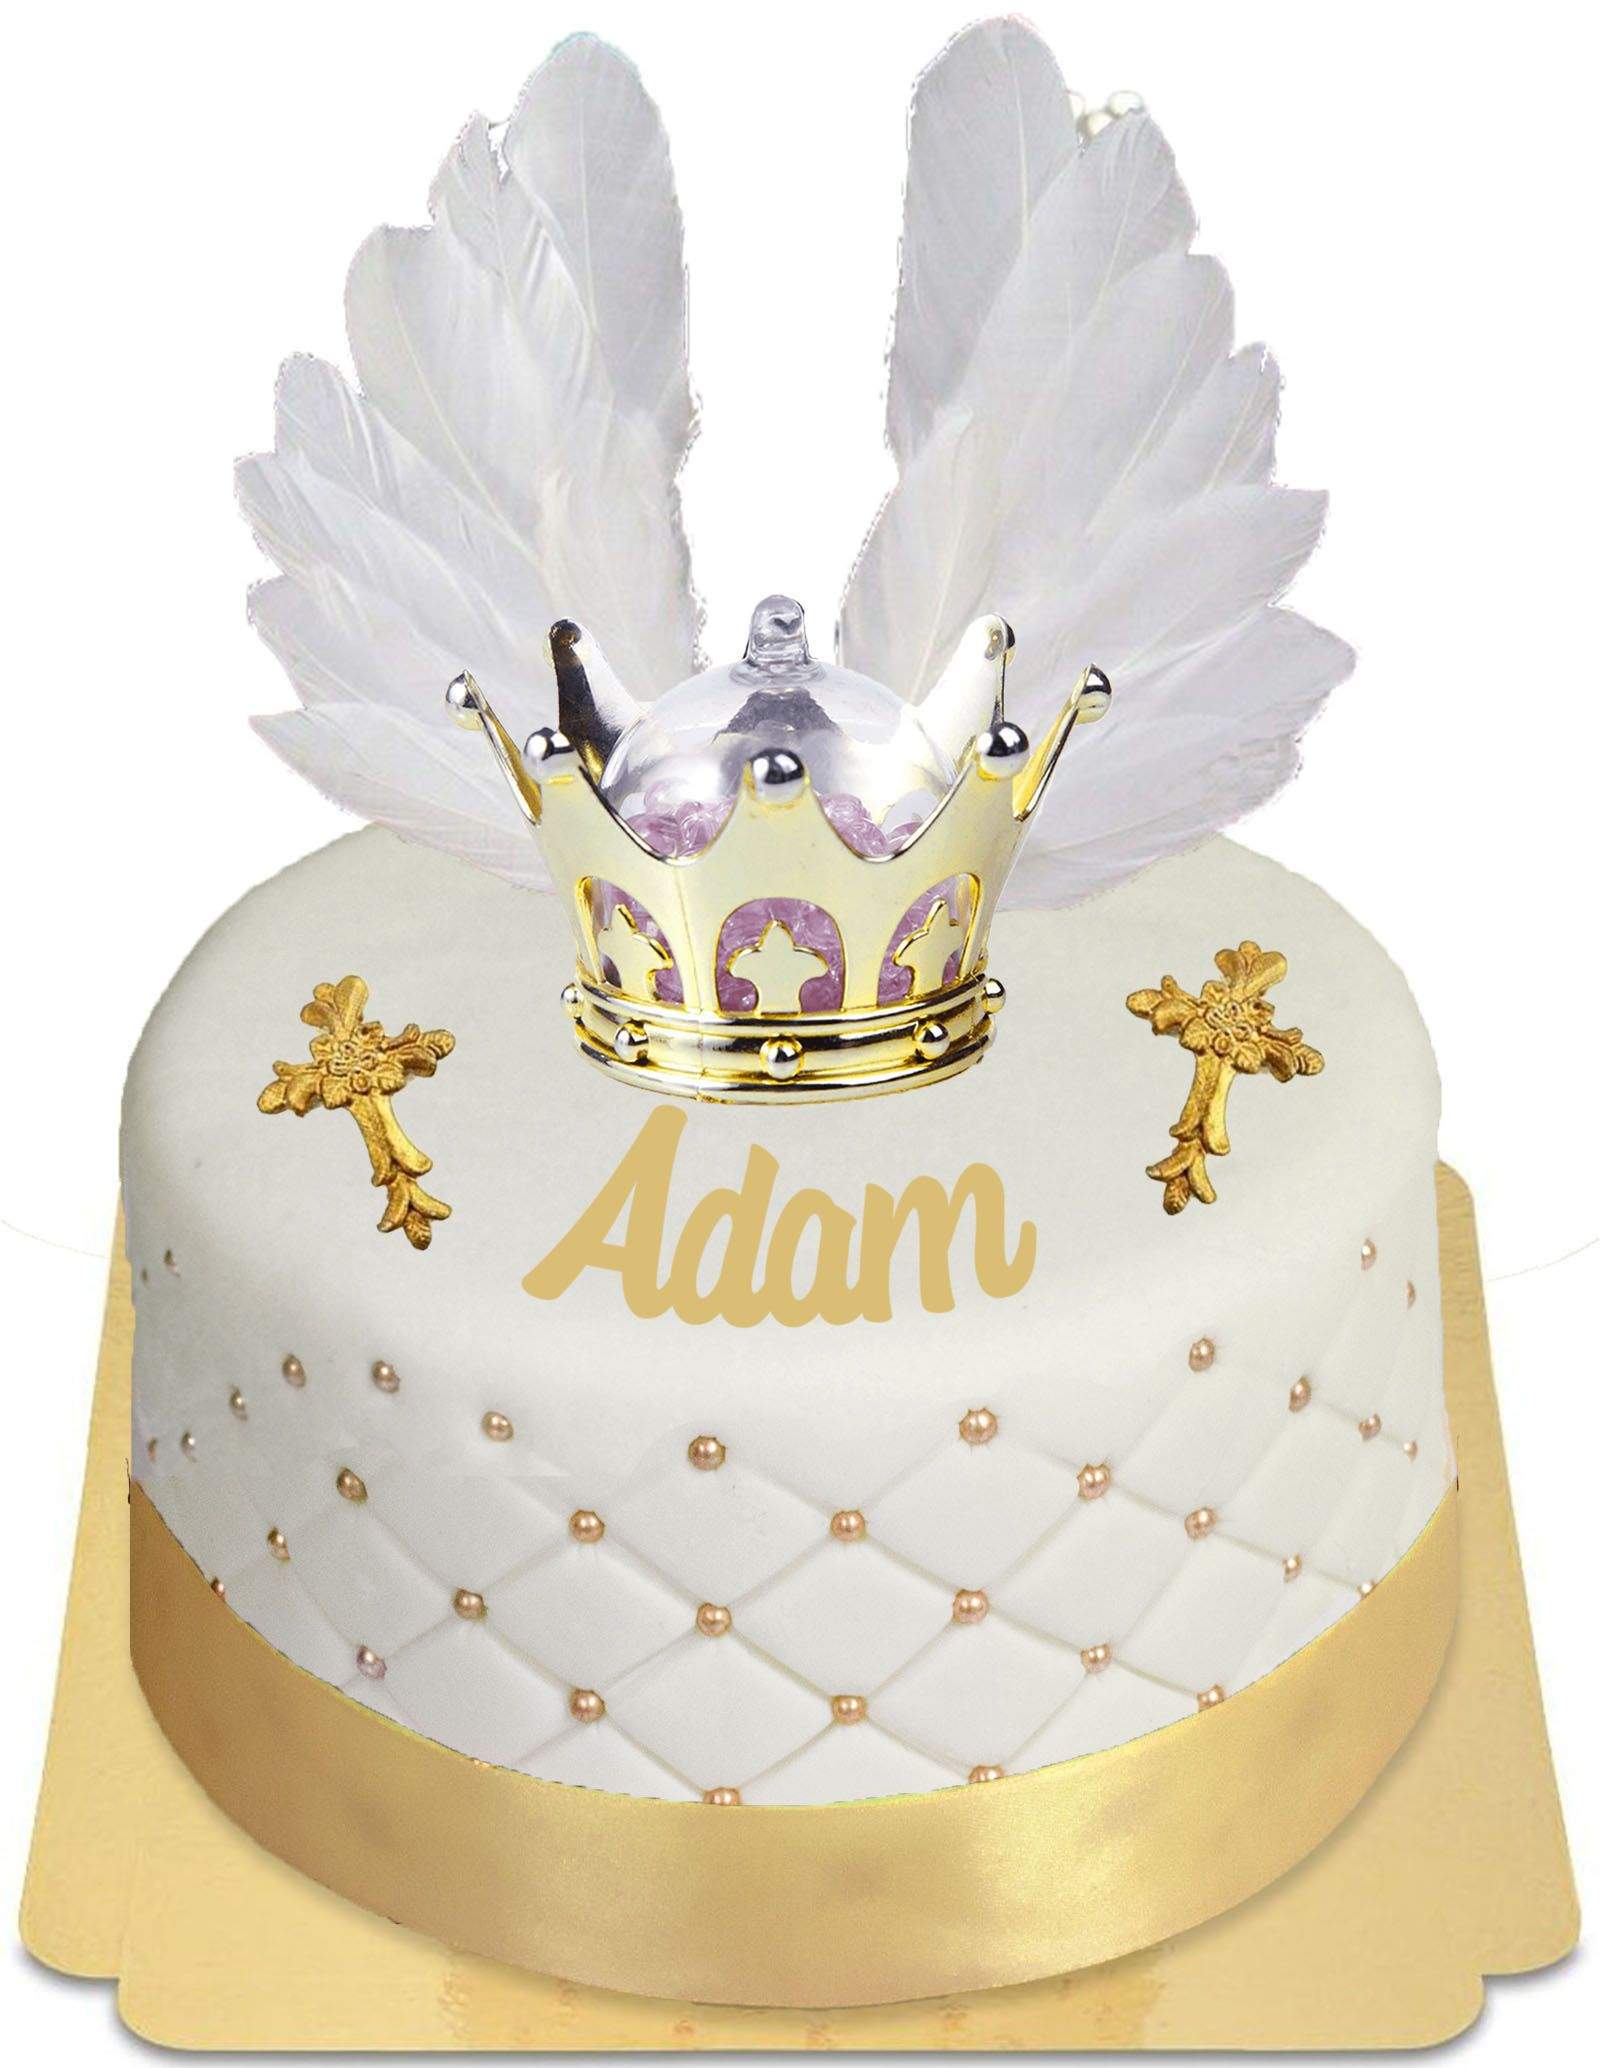 Christening Cakes | Cakes to Order | Greenhalgh's Craft Bakery